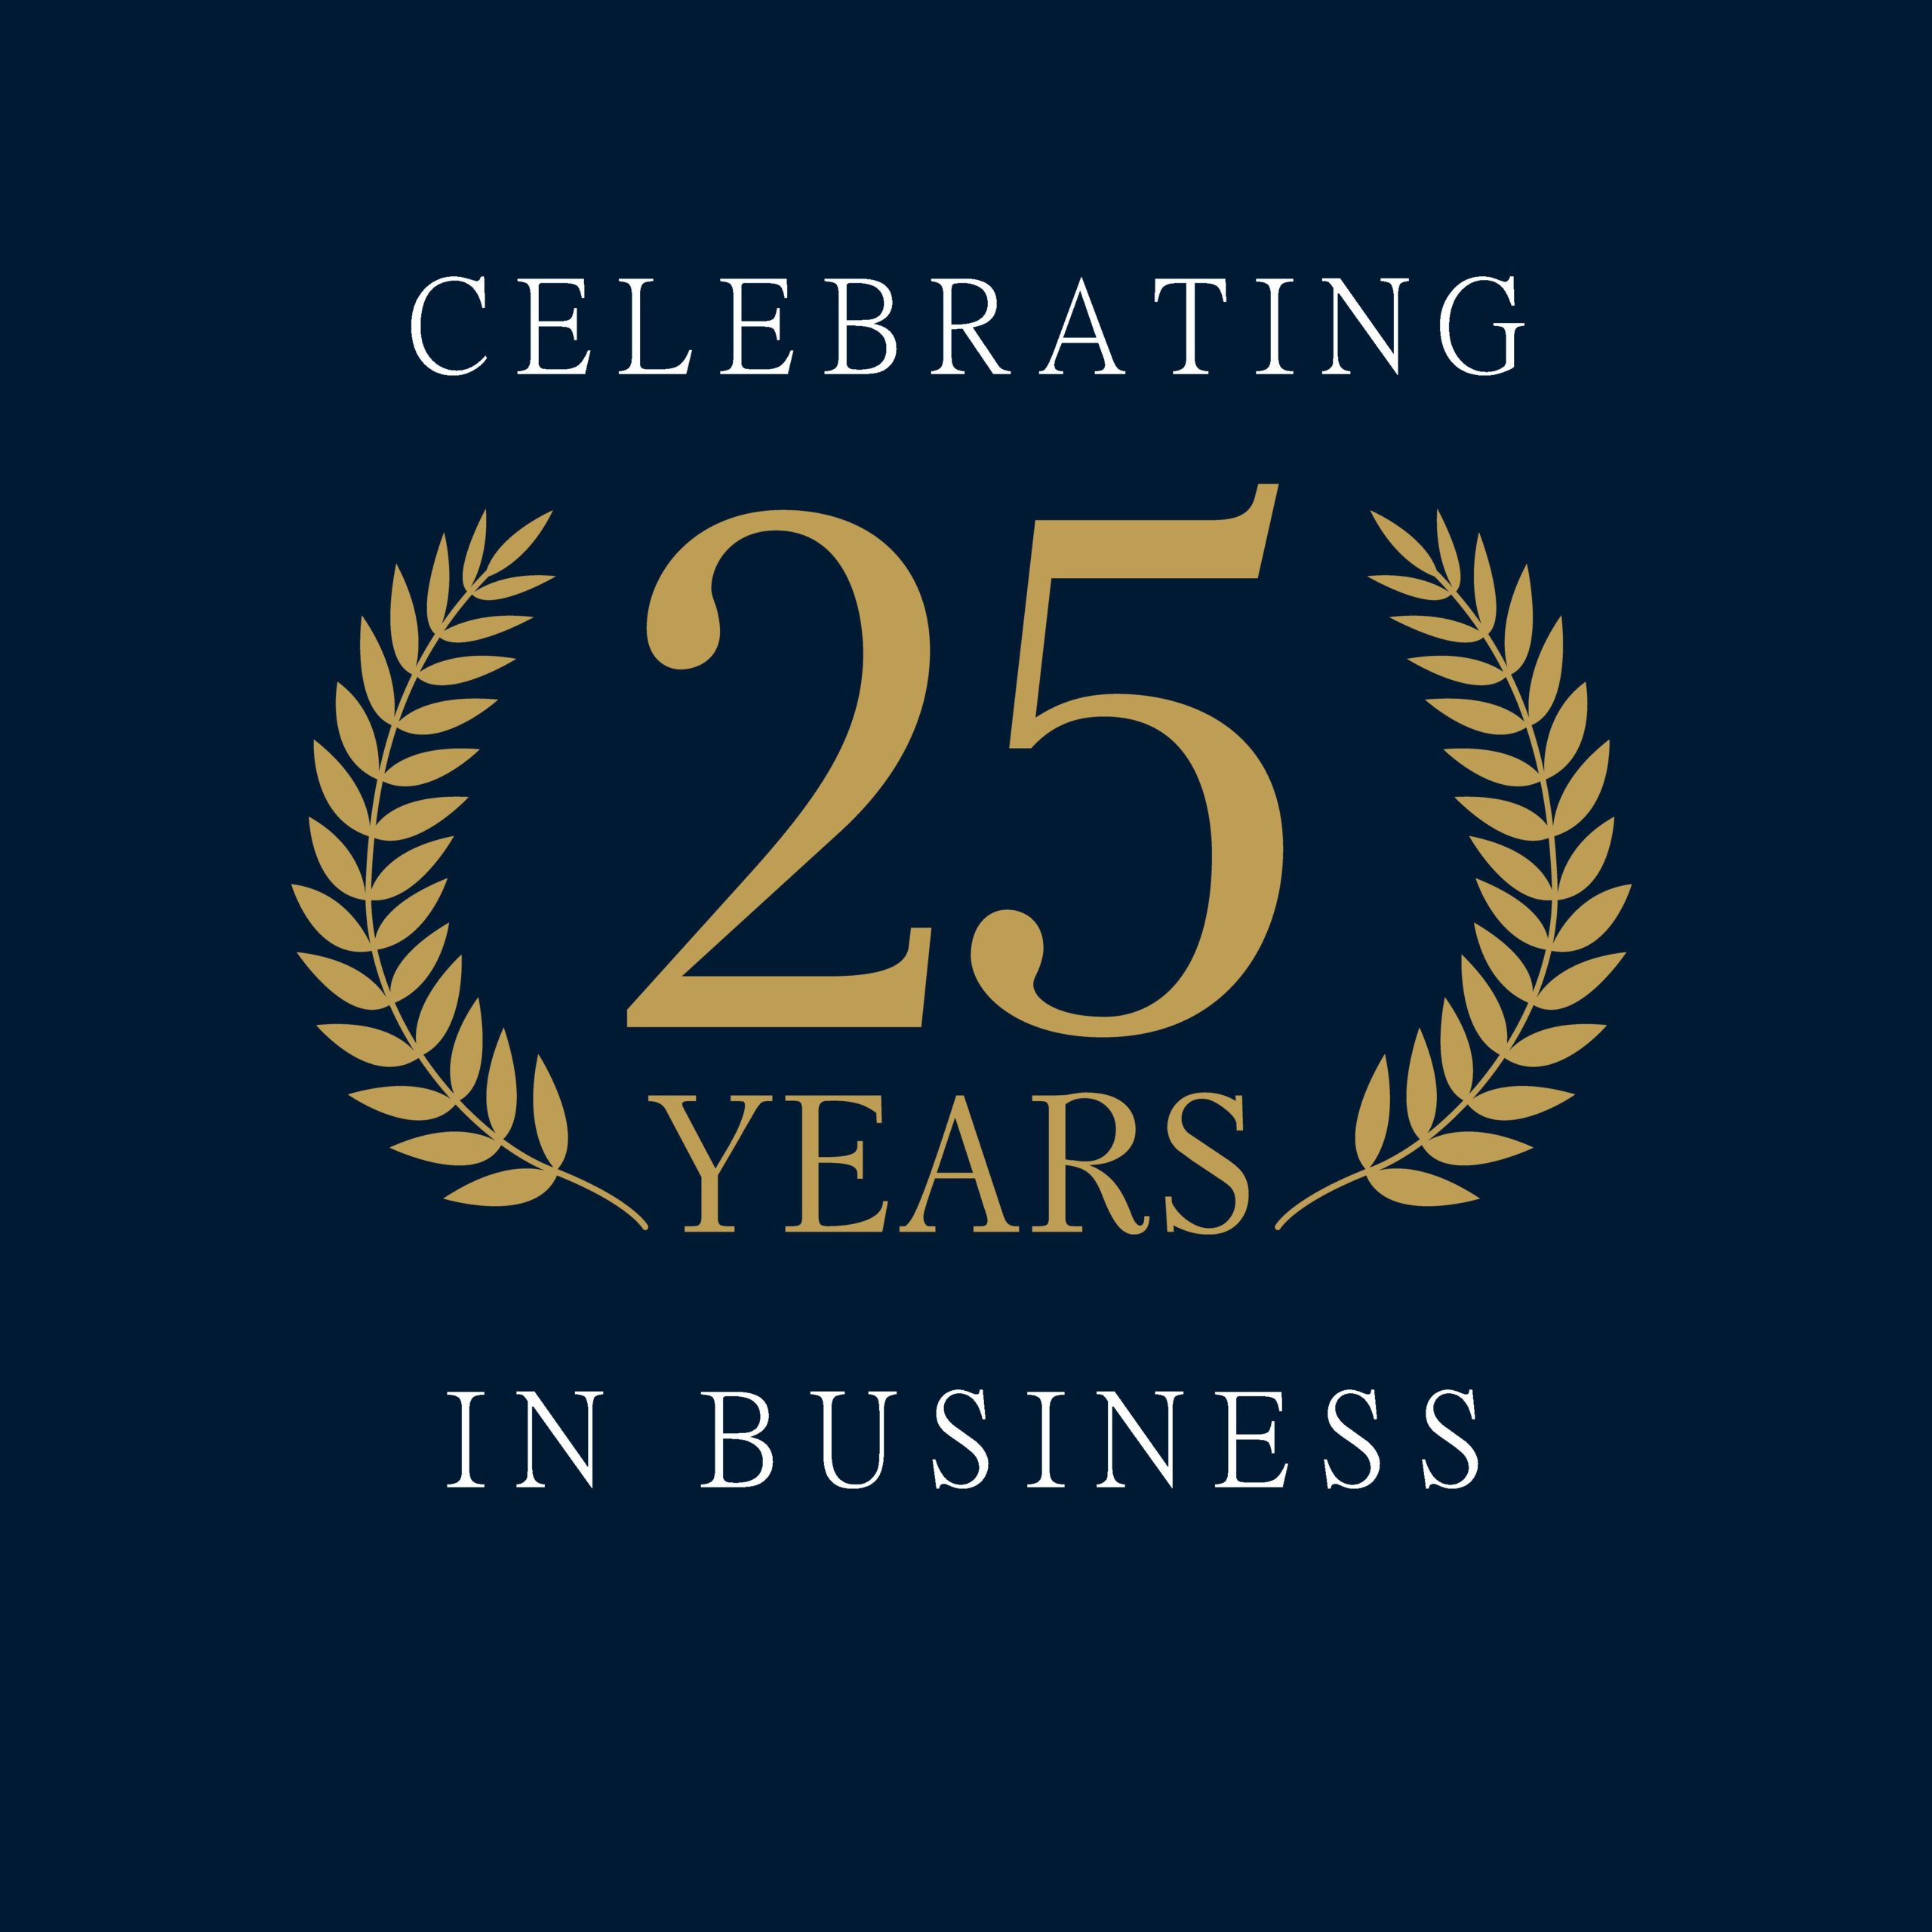 ILS Celebrates 25 Years In Business